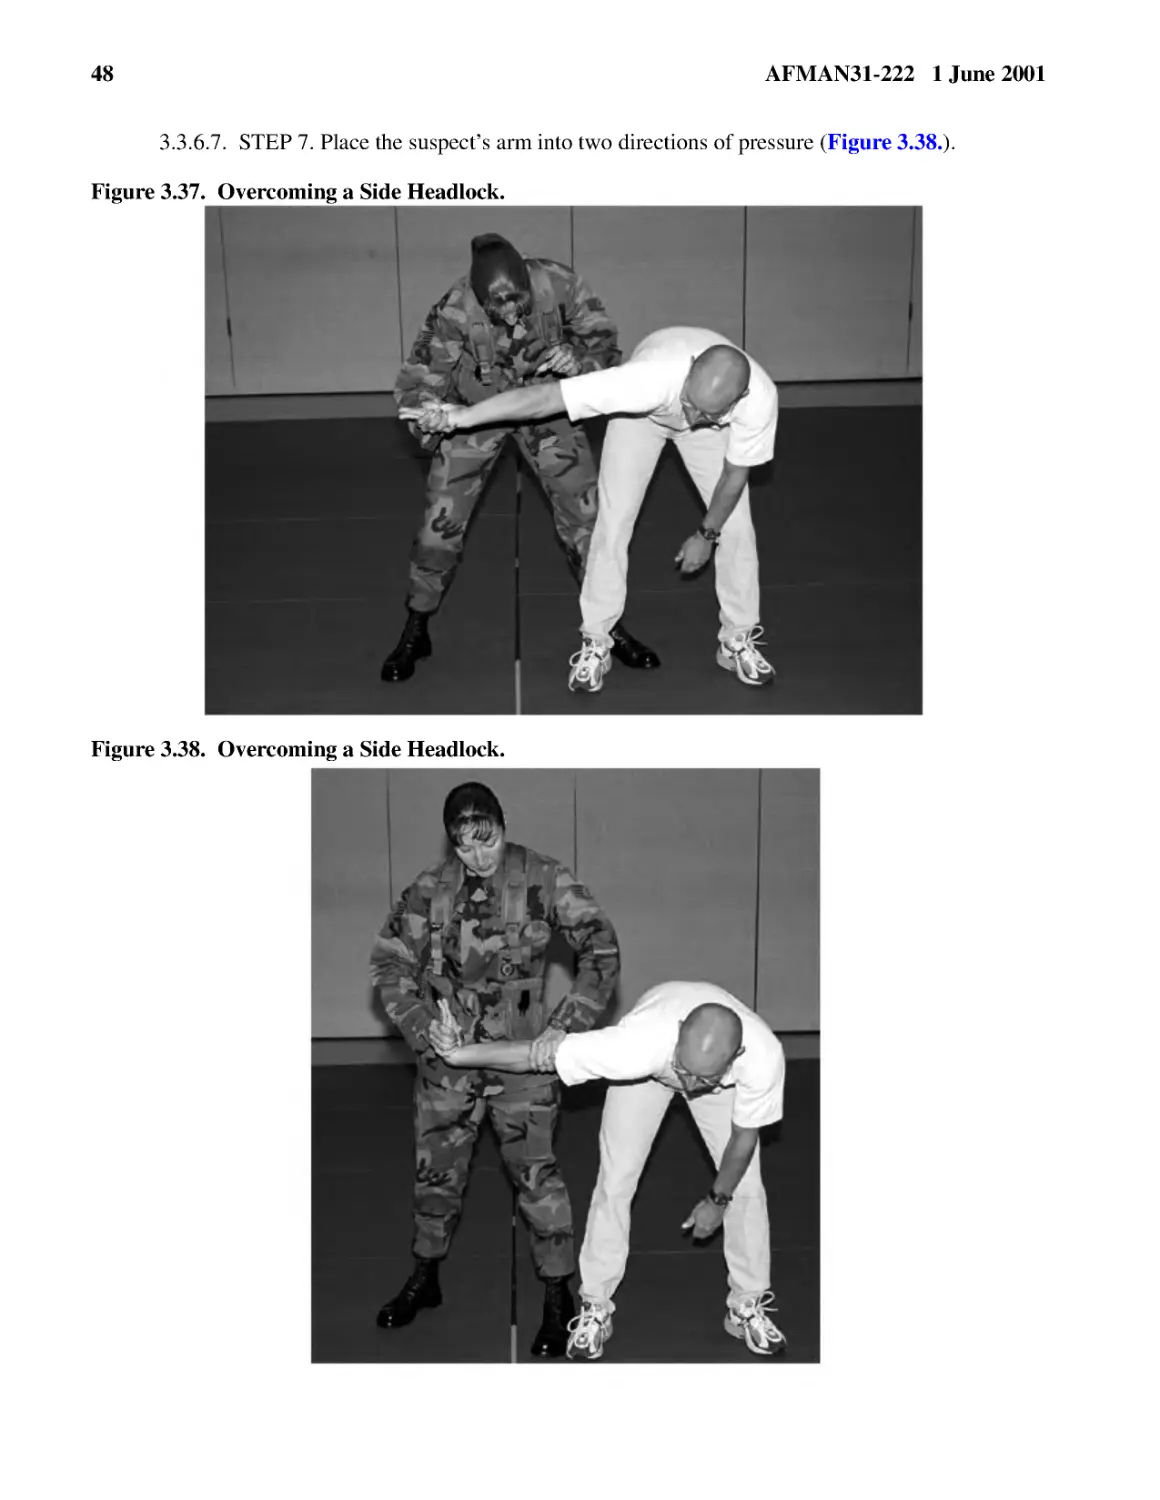 3.3.6.7.� STEP 7. Place the suspect’s arm into two directions of pressure (
Figure 3.38.� Overcoming a Side Headlock.